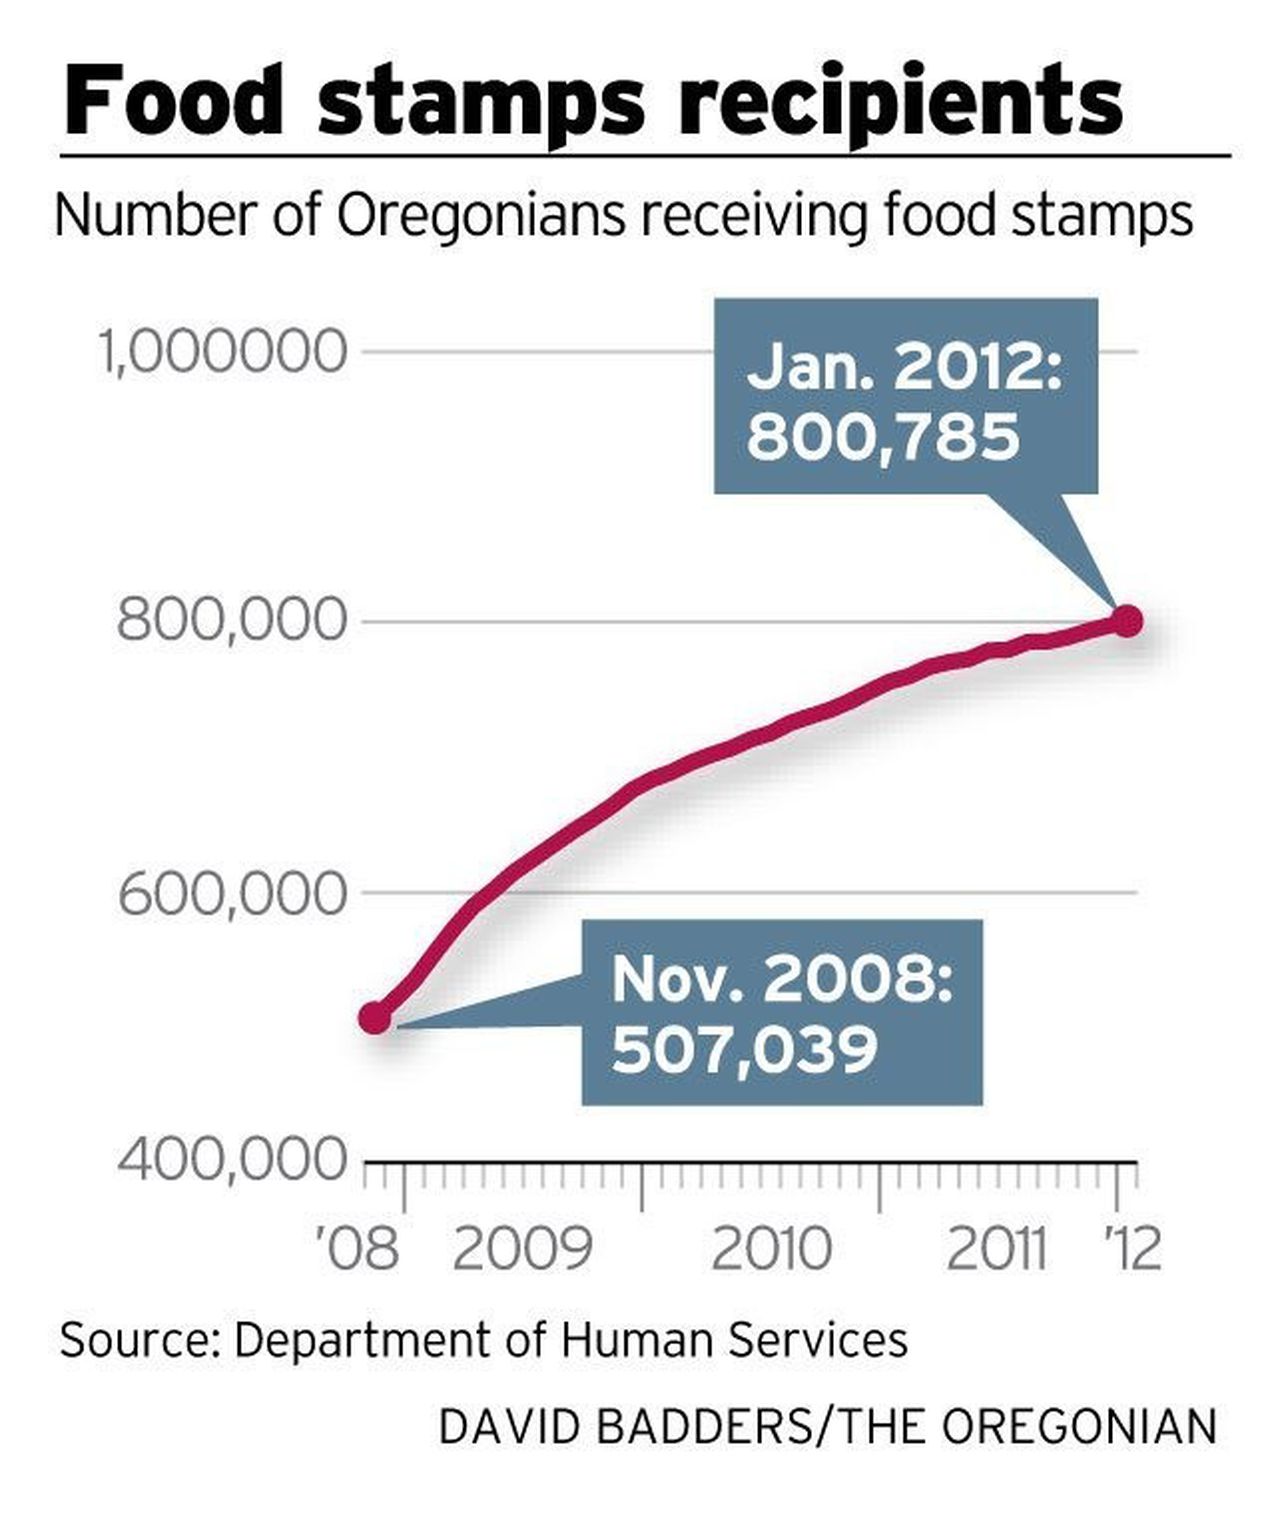 More than 800,000 Oregonians received food stamp benefits in January ...